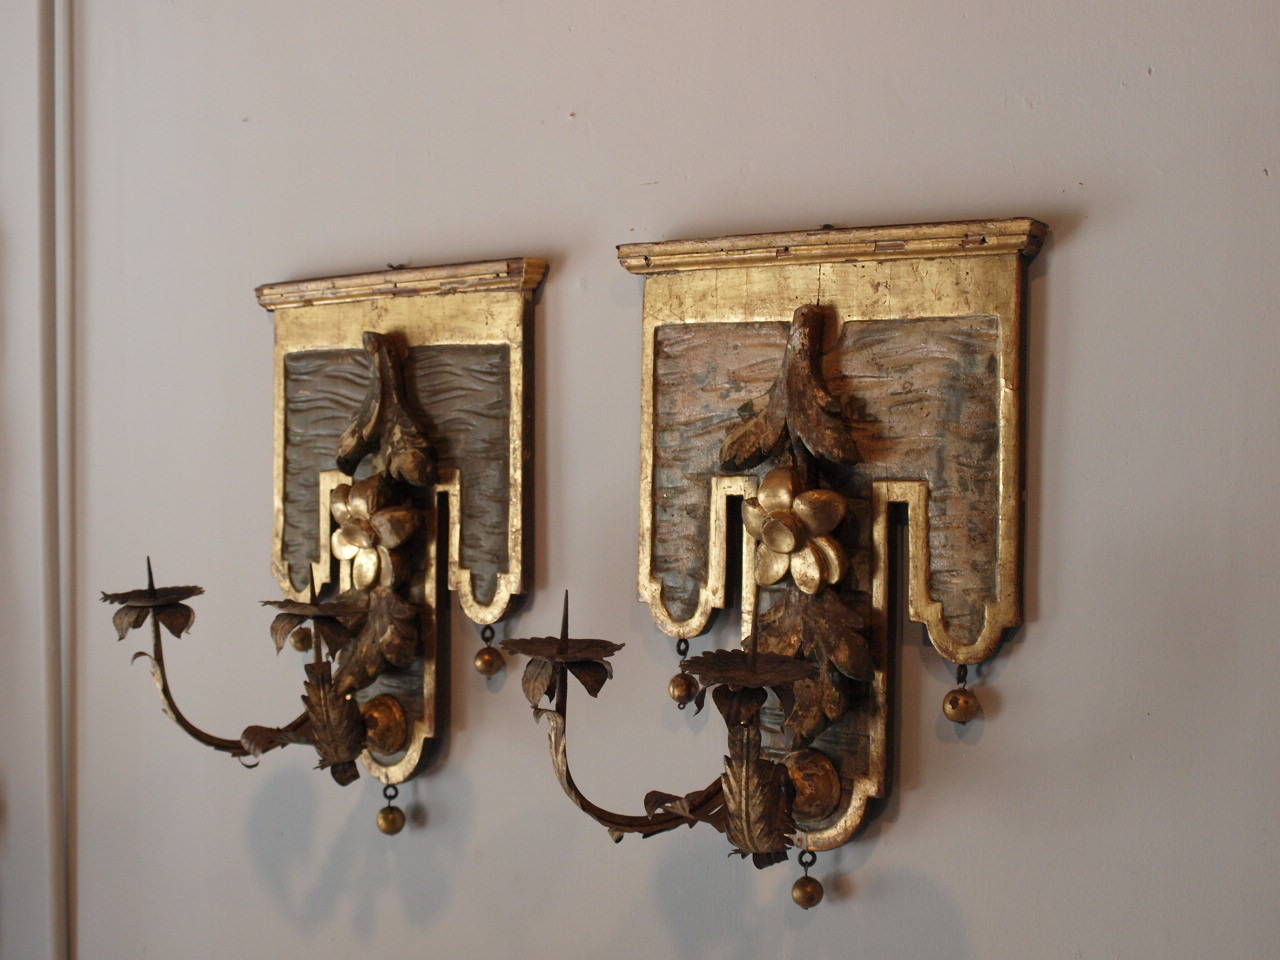 A stunning pair of Northern Italian Sconces - Appliqués - lacquered and water gilded.  The sconces have removable gilt iron arms.  The backplate is beautifully adorned with a wonderfully carved elegant floral motif - also water gilded.